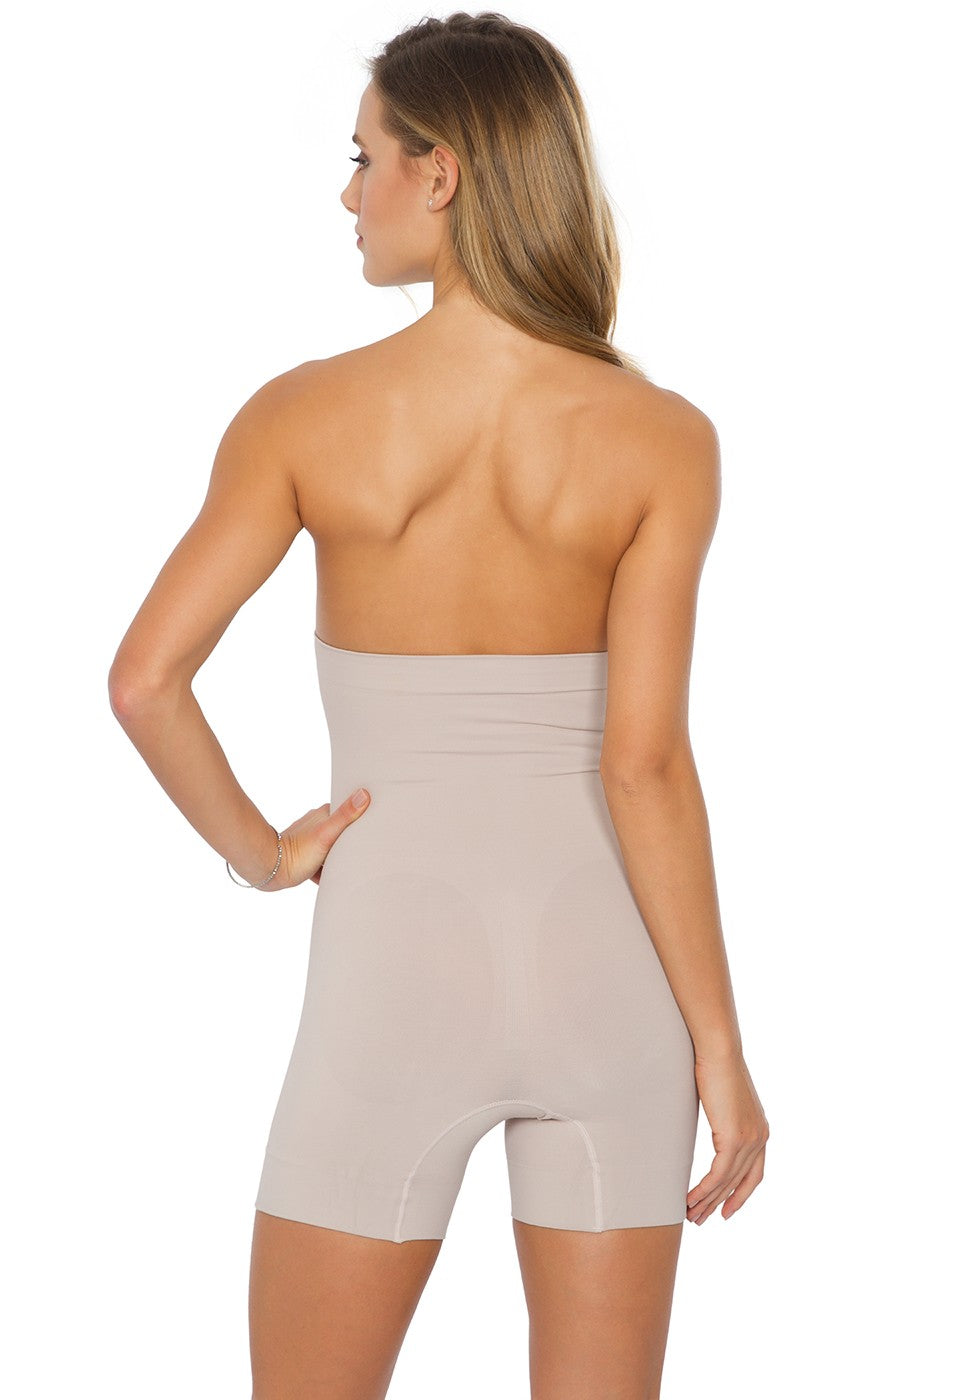 Emana® High Waist and Recovery Shorts